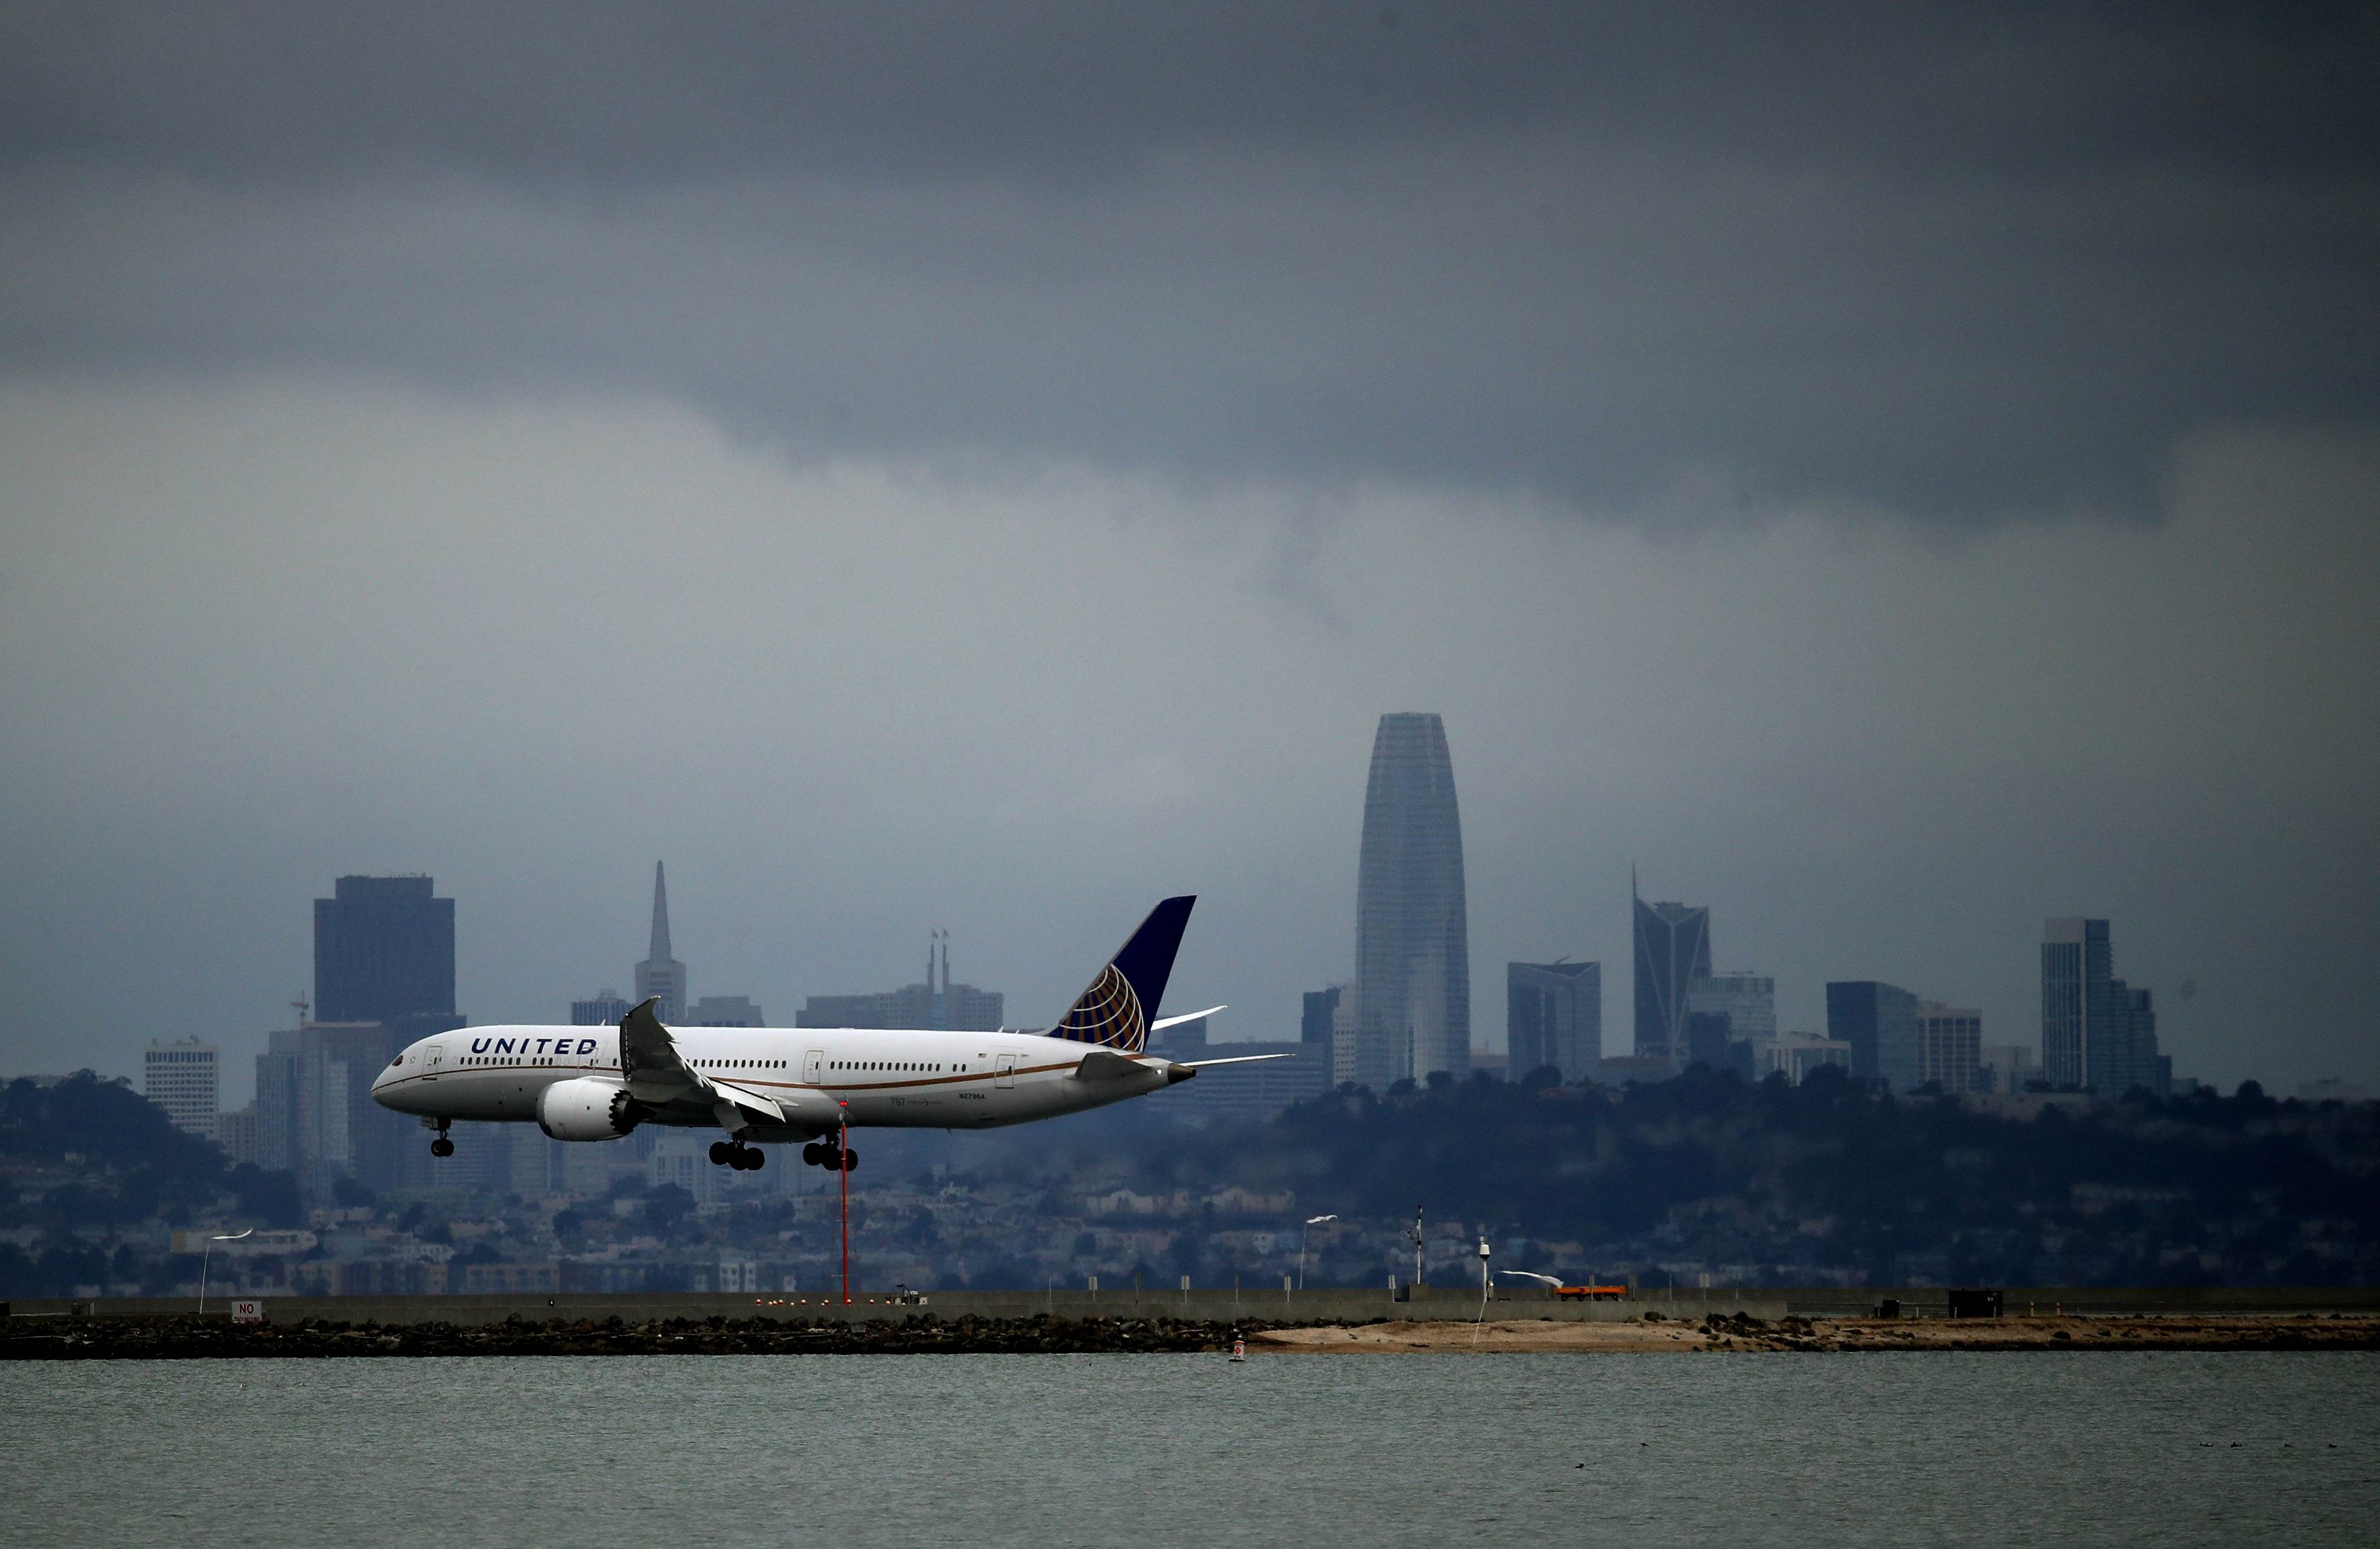 A United Airlines plane lands at San Francisco International Airport. (Credit: AFP)